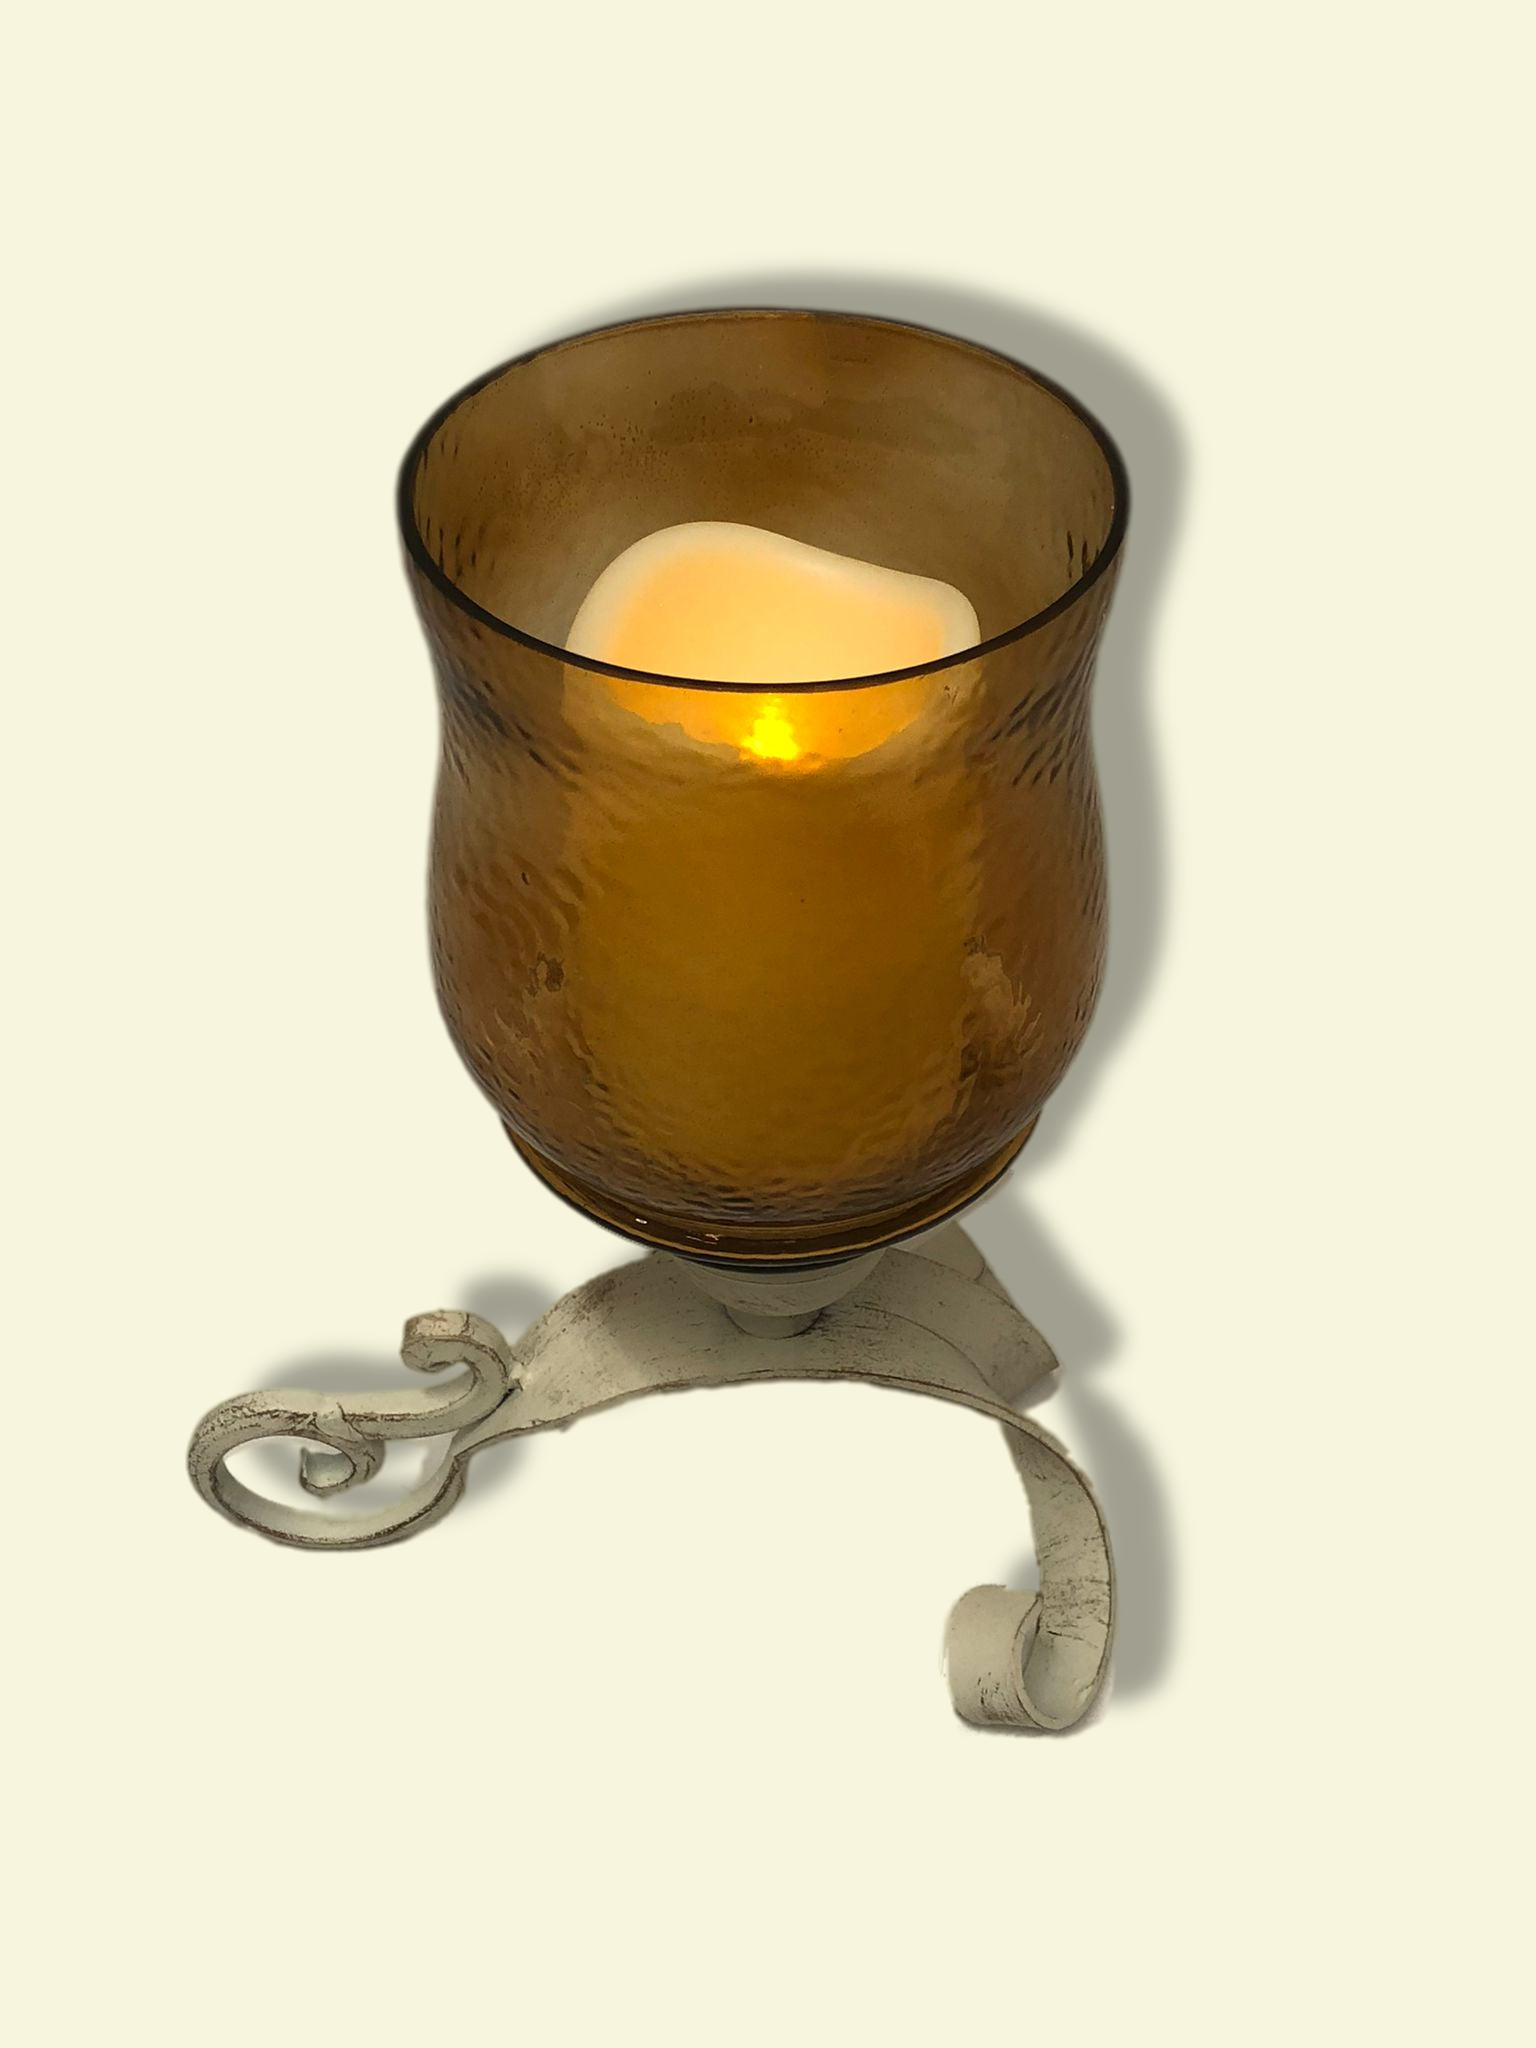 Amber Glass Hurricane with Scroll Design Pedestal by Valerie